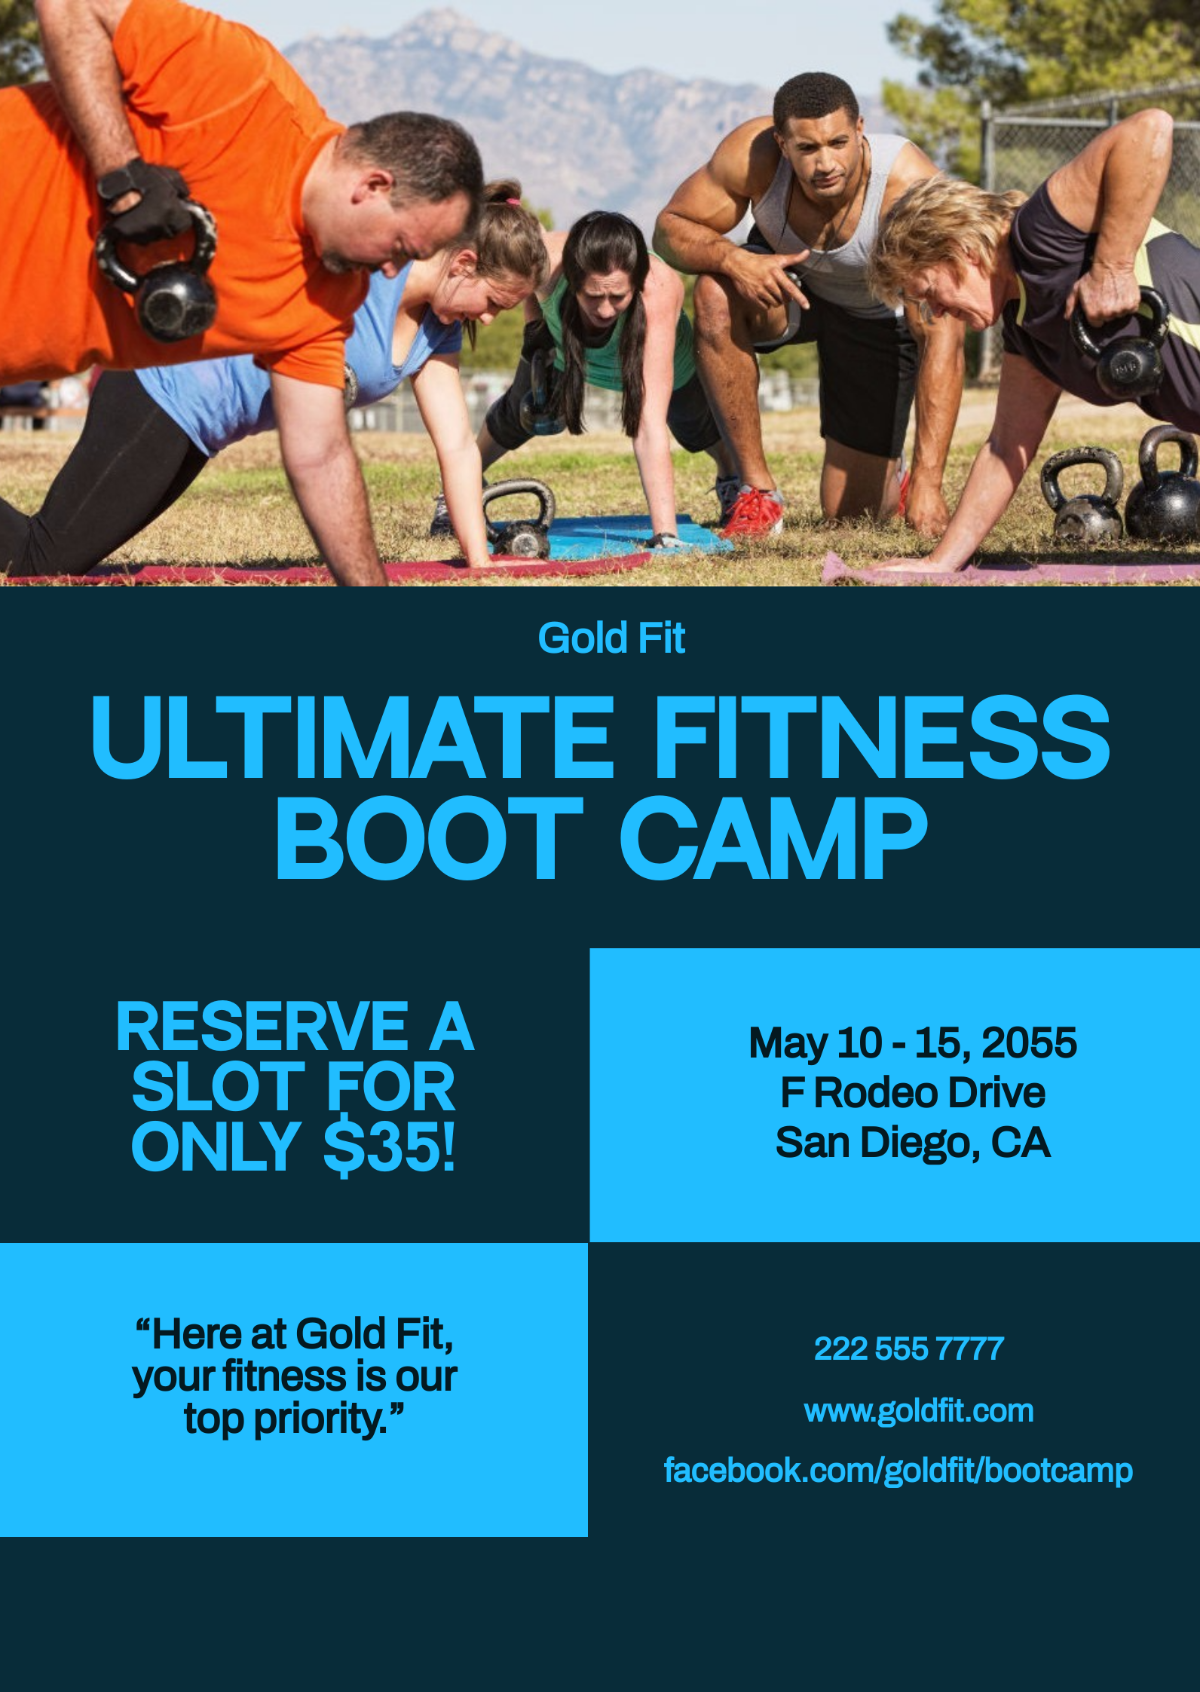 Advertising Boot Camp Flyer Template